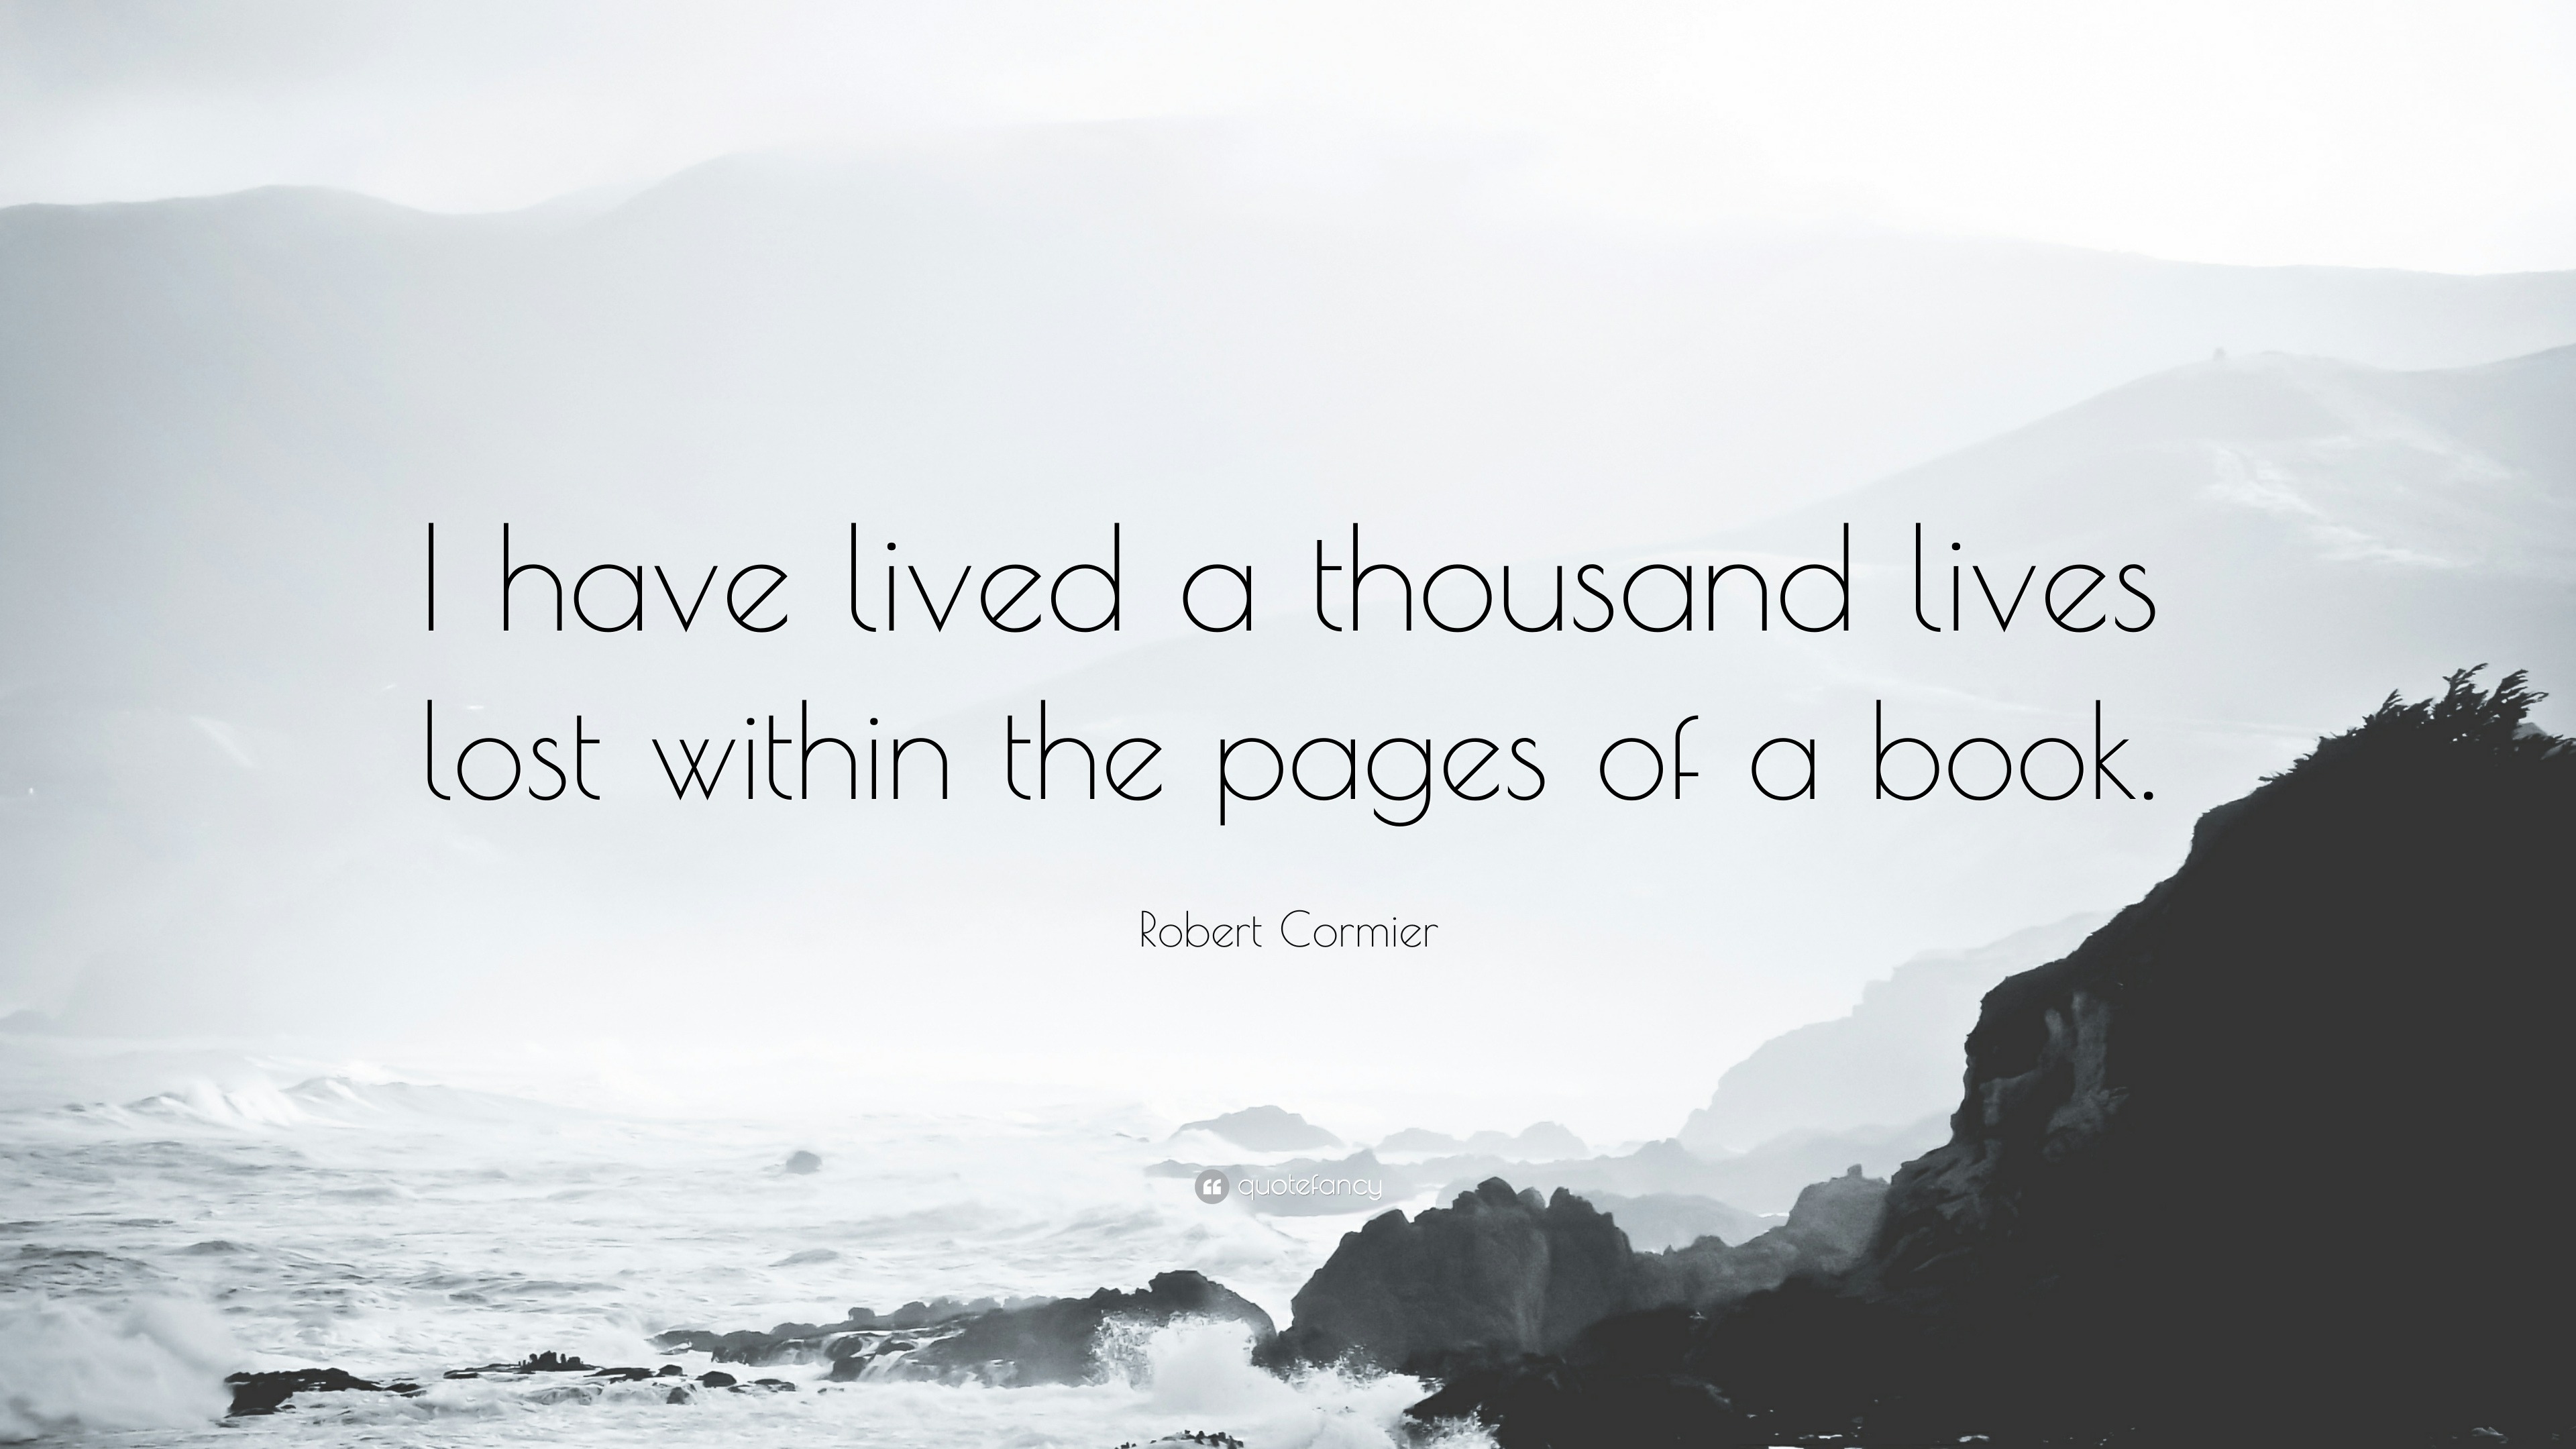 Robert Cormier Quote: “I have lived a thousand lives lost within the